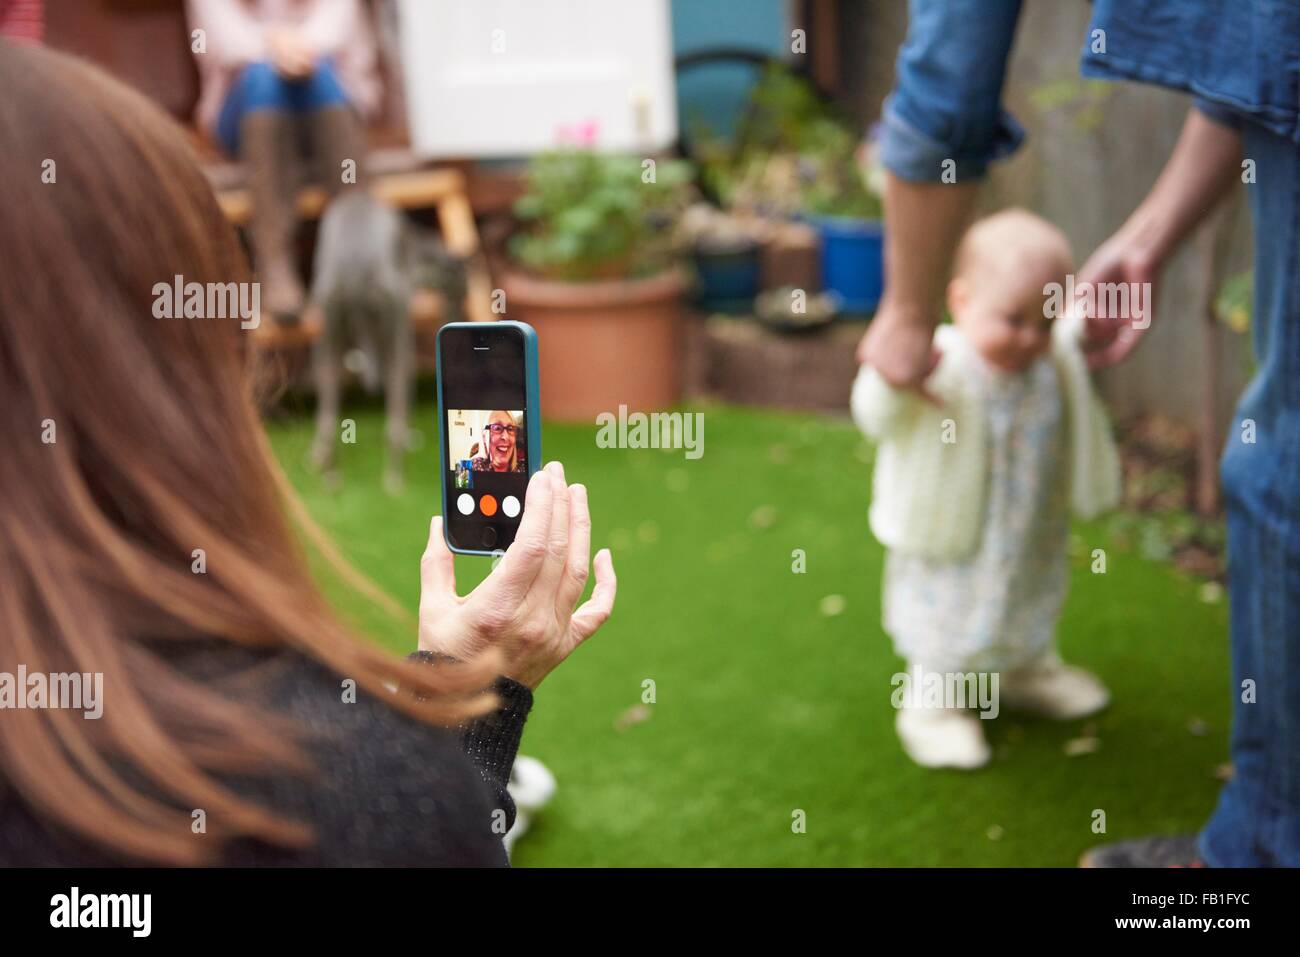 Mother in garden using smartphone to film daughter learning to walk, focus on foreground Stock Photo